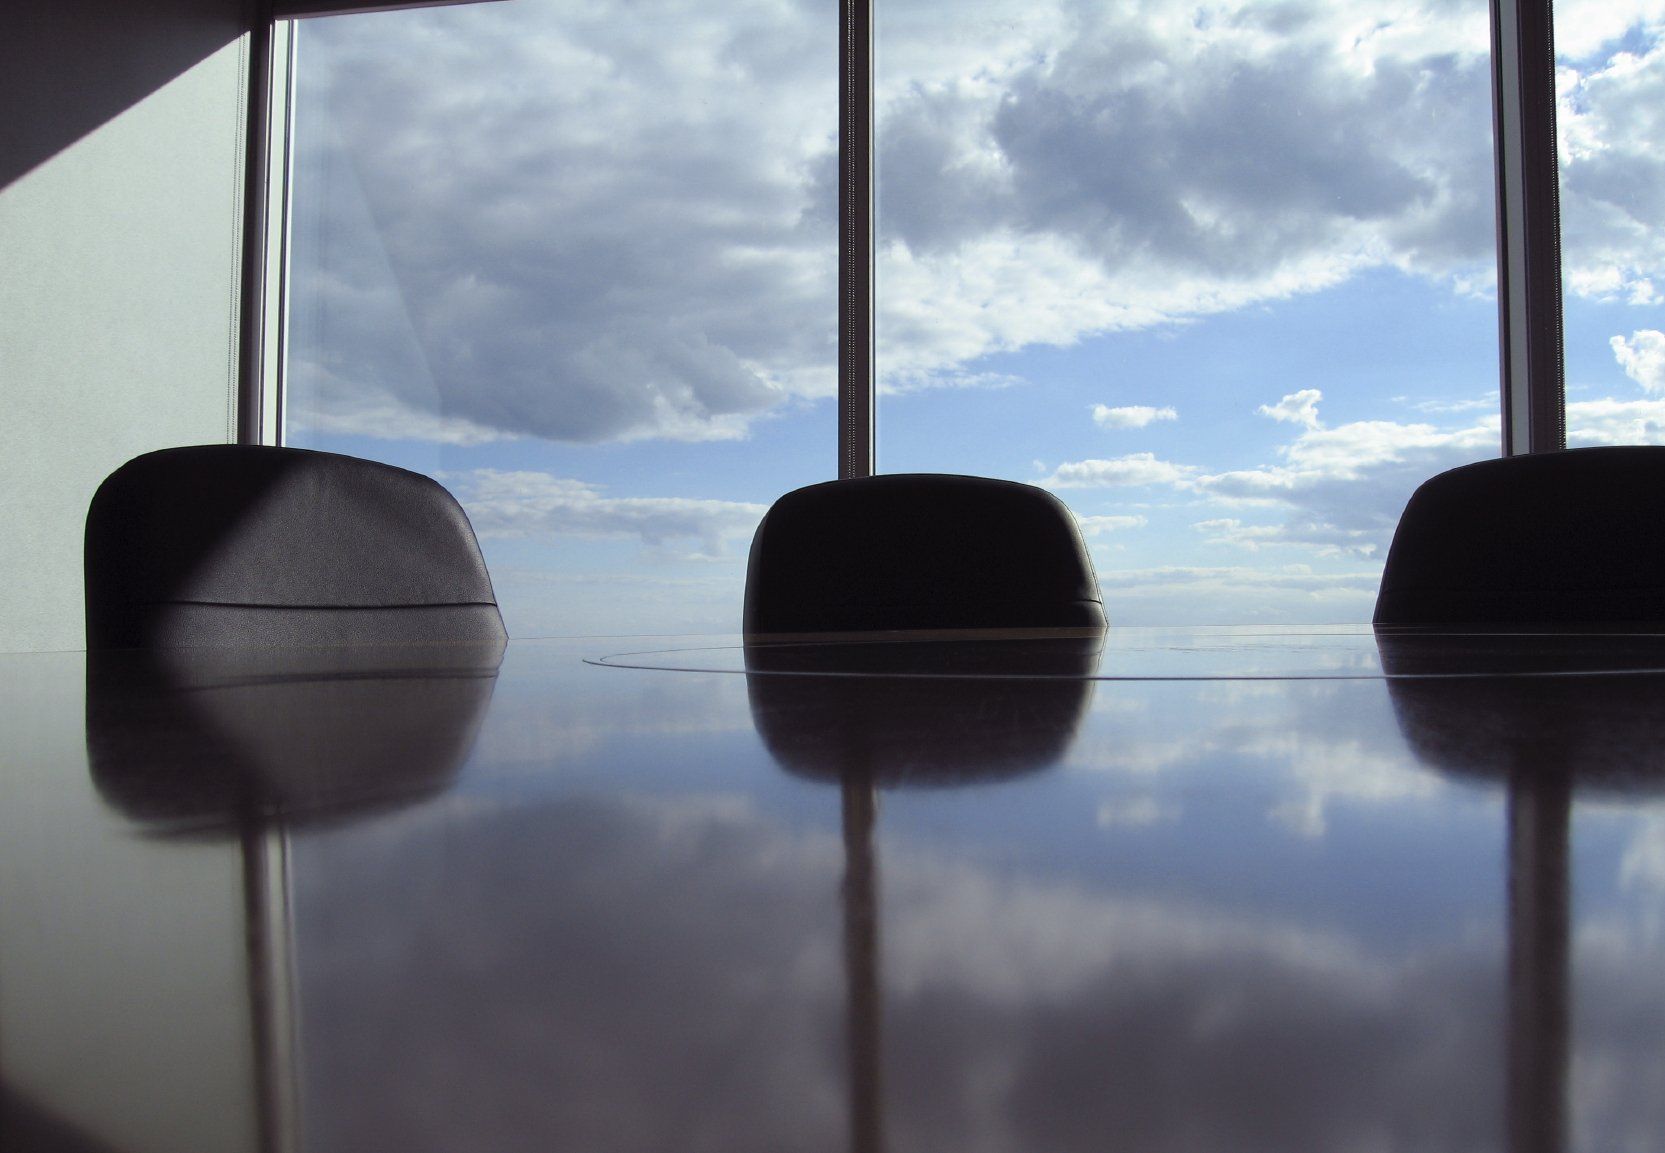 Picture of office chairs in front of window with sky in background